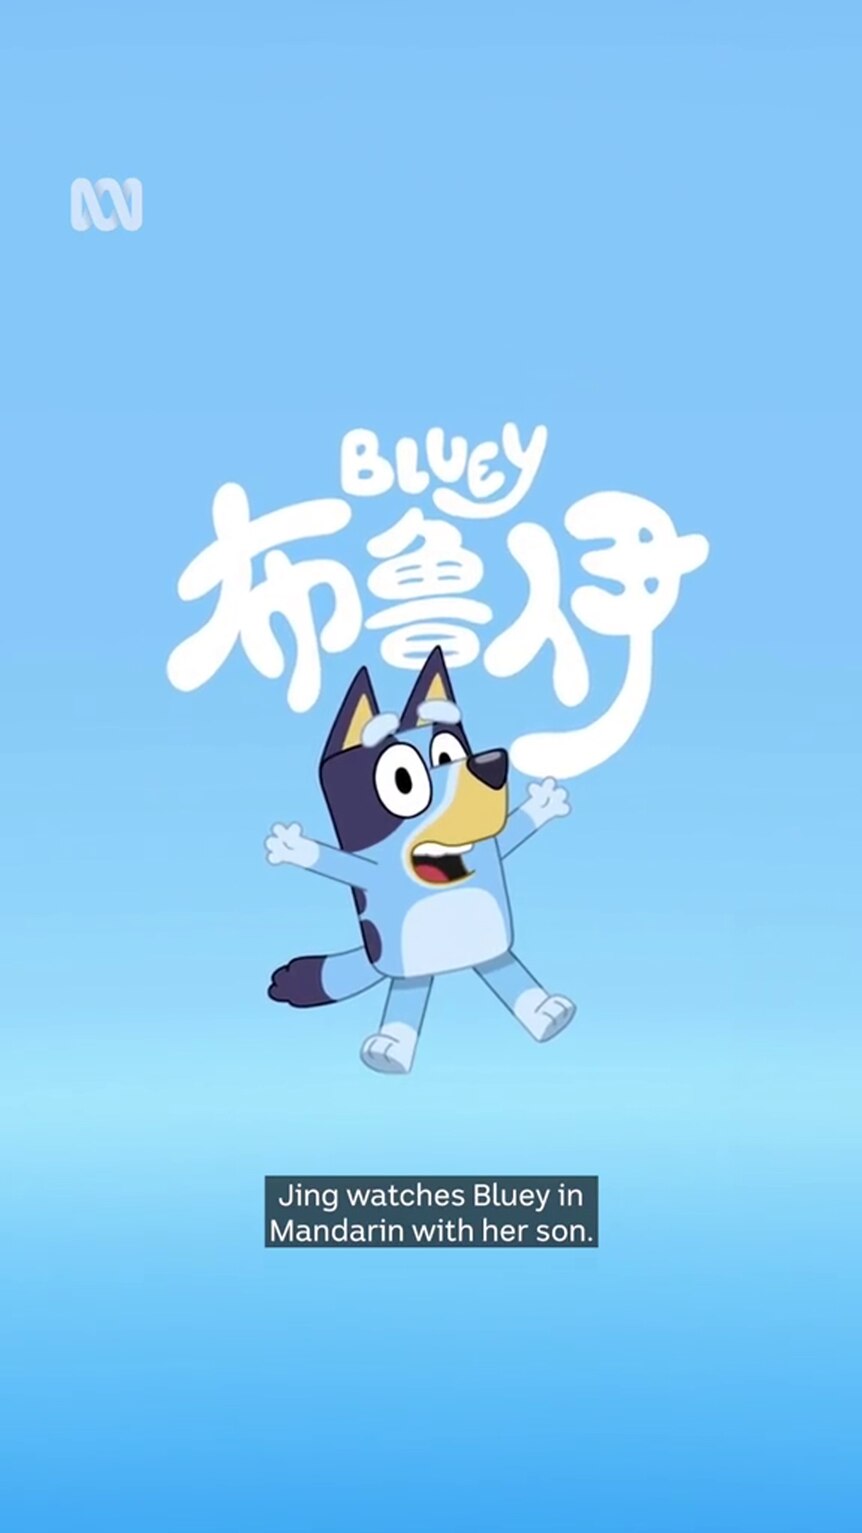 Bluey appears on a blue background with three large Chinese characters above her head